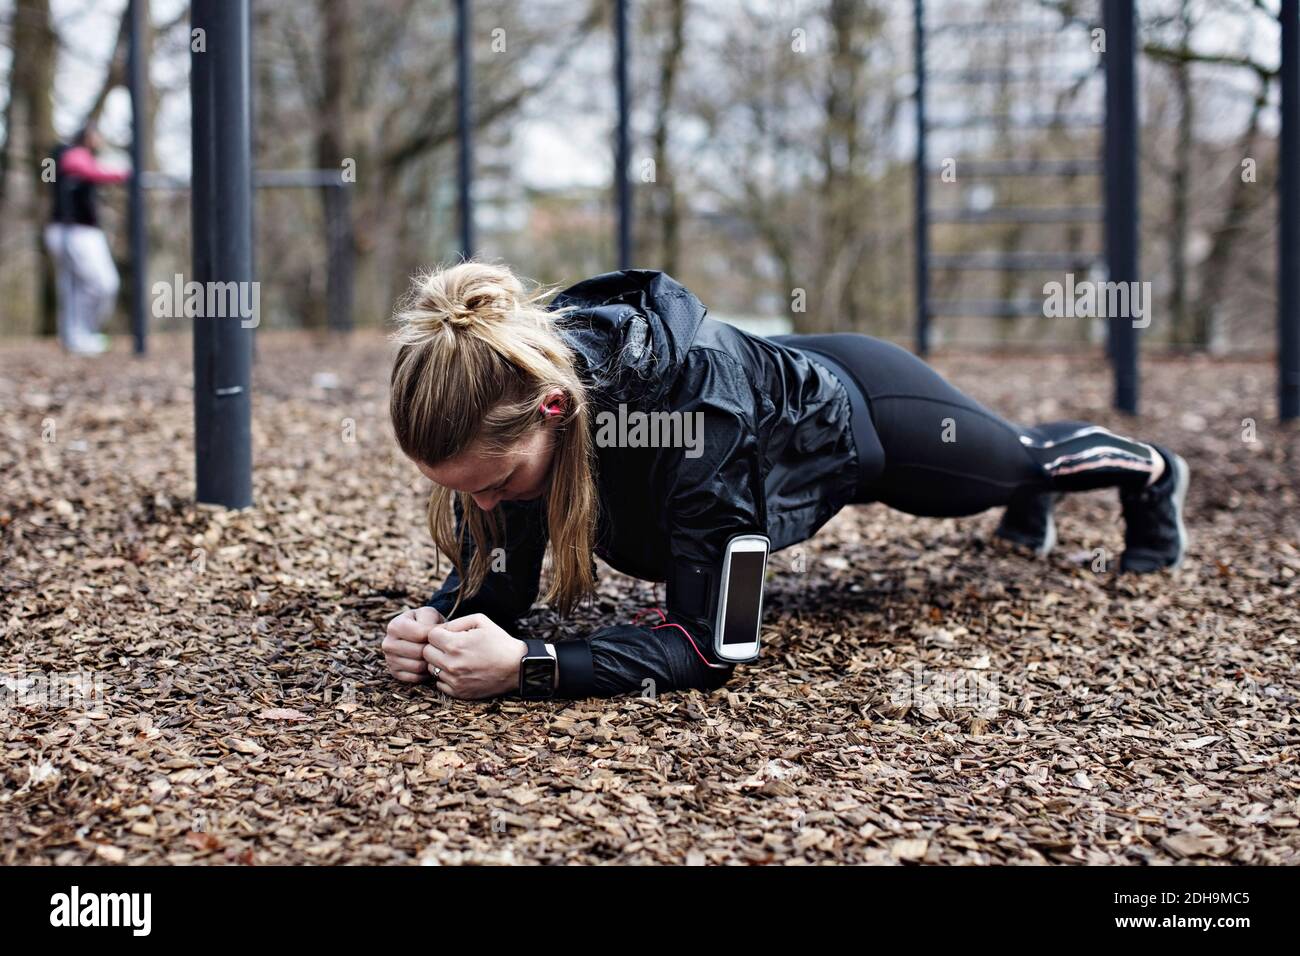 Full length of female athlete performing plank position in forest Stock Photo